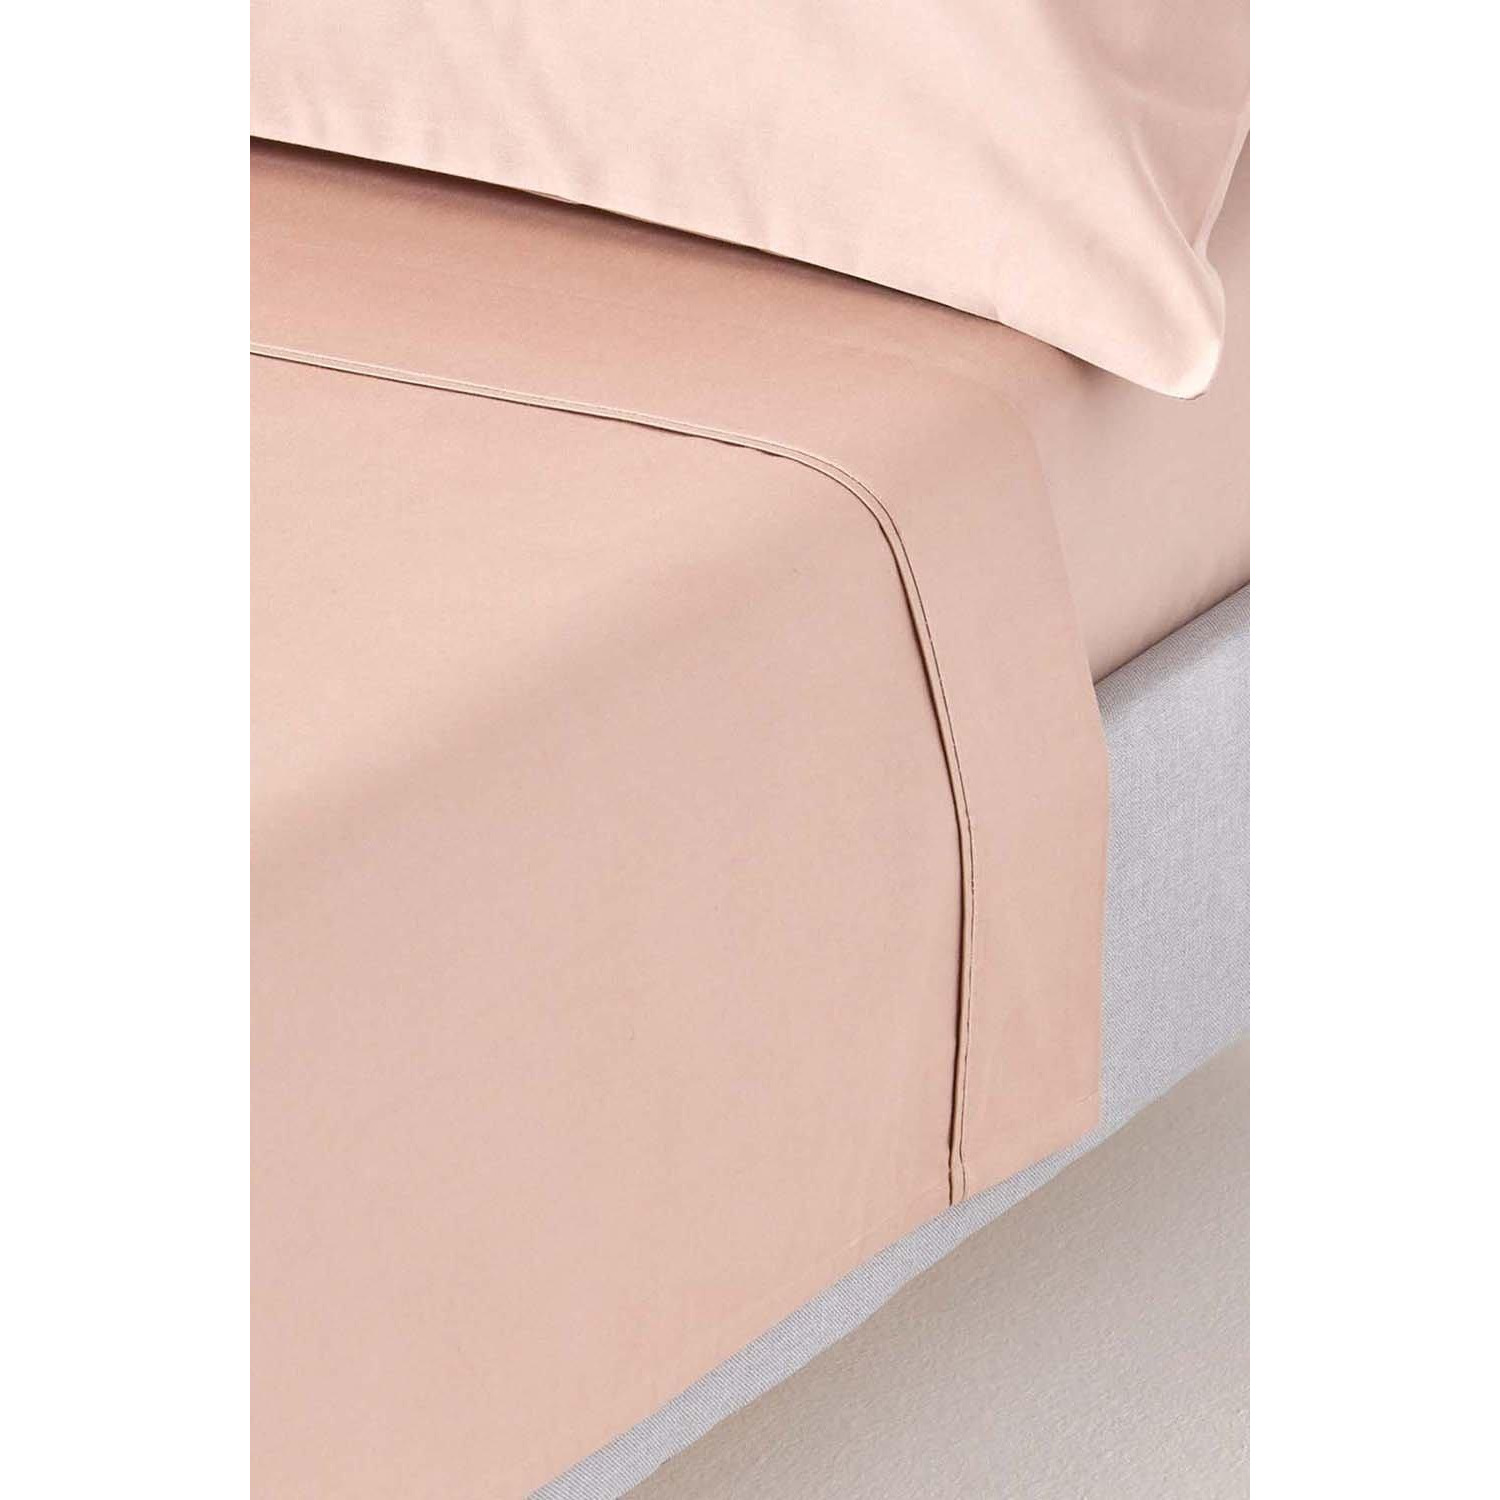 Egyptian Cotton Flat Sheet 1000 Thread Count - image 1